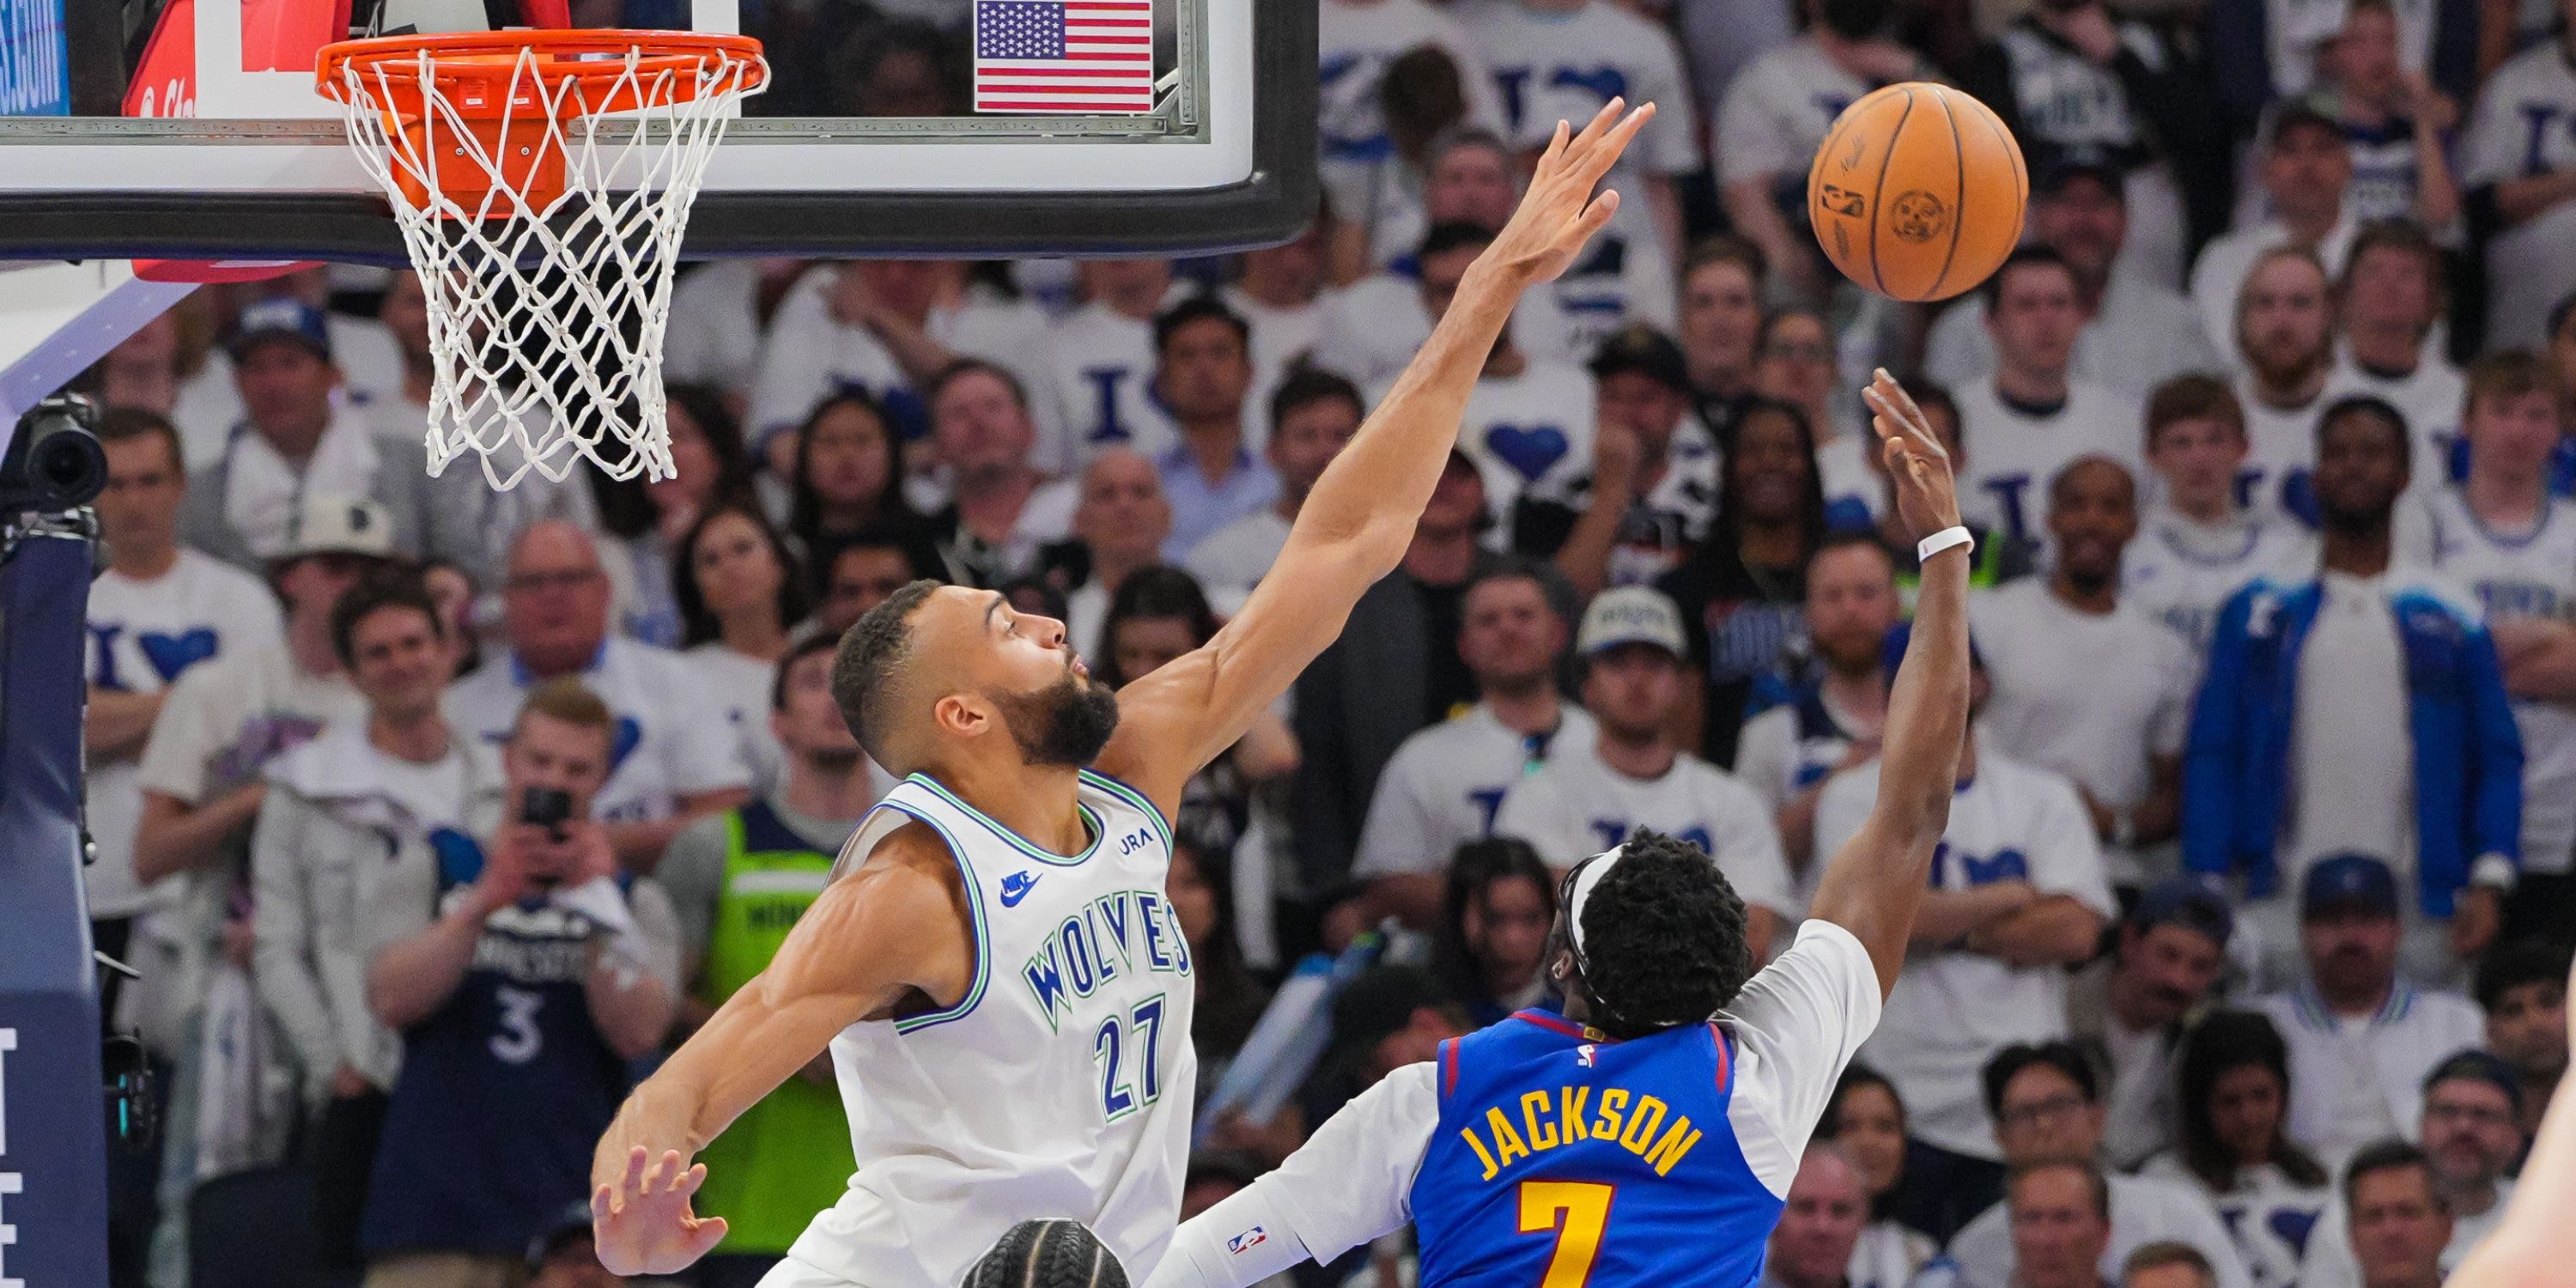 Rudy Gobert Gave Perfect Response to Charles Barkley’s Harsh Game 7 Criticism